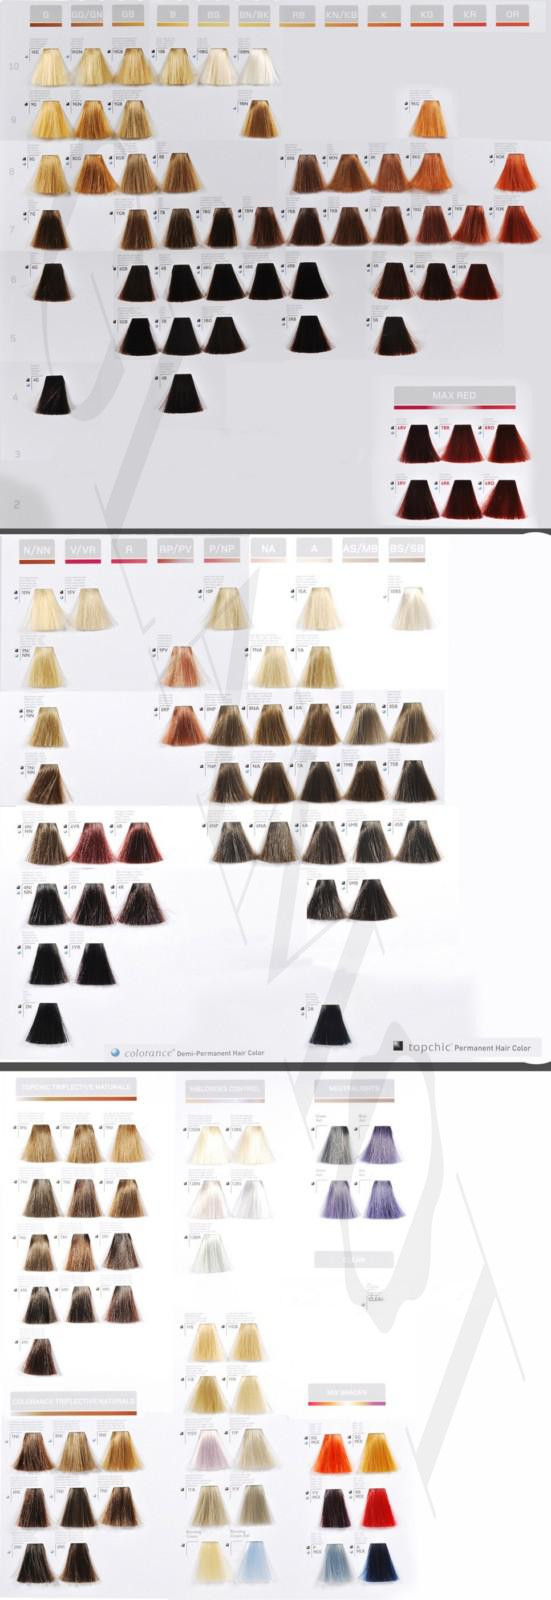 Goldwell Demi Permanent Hair Color Chart